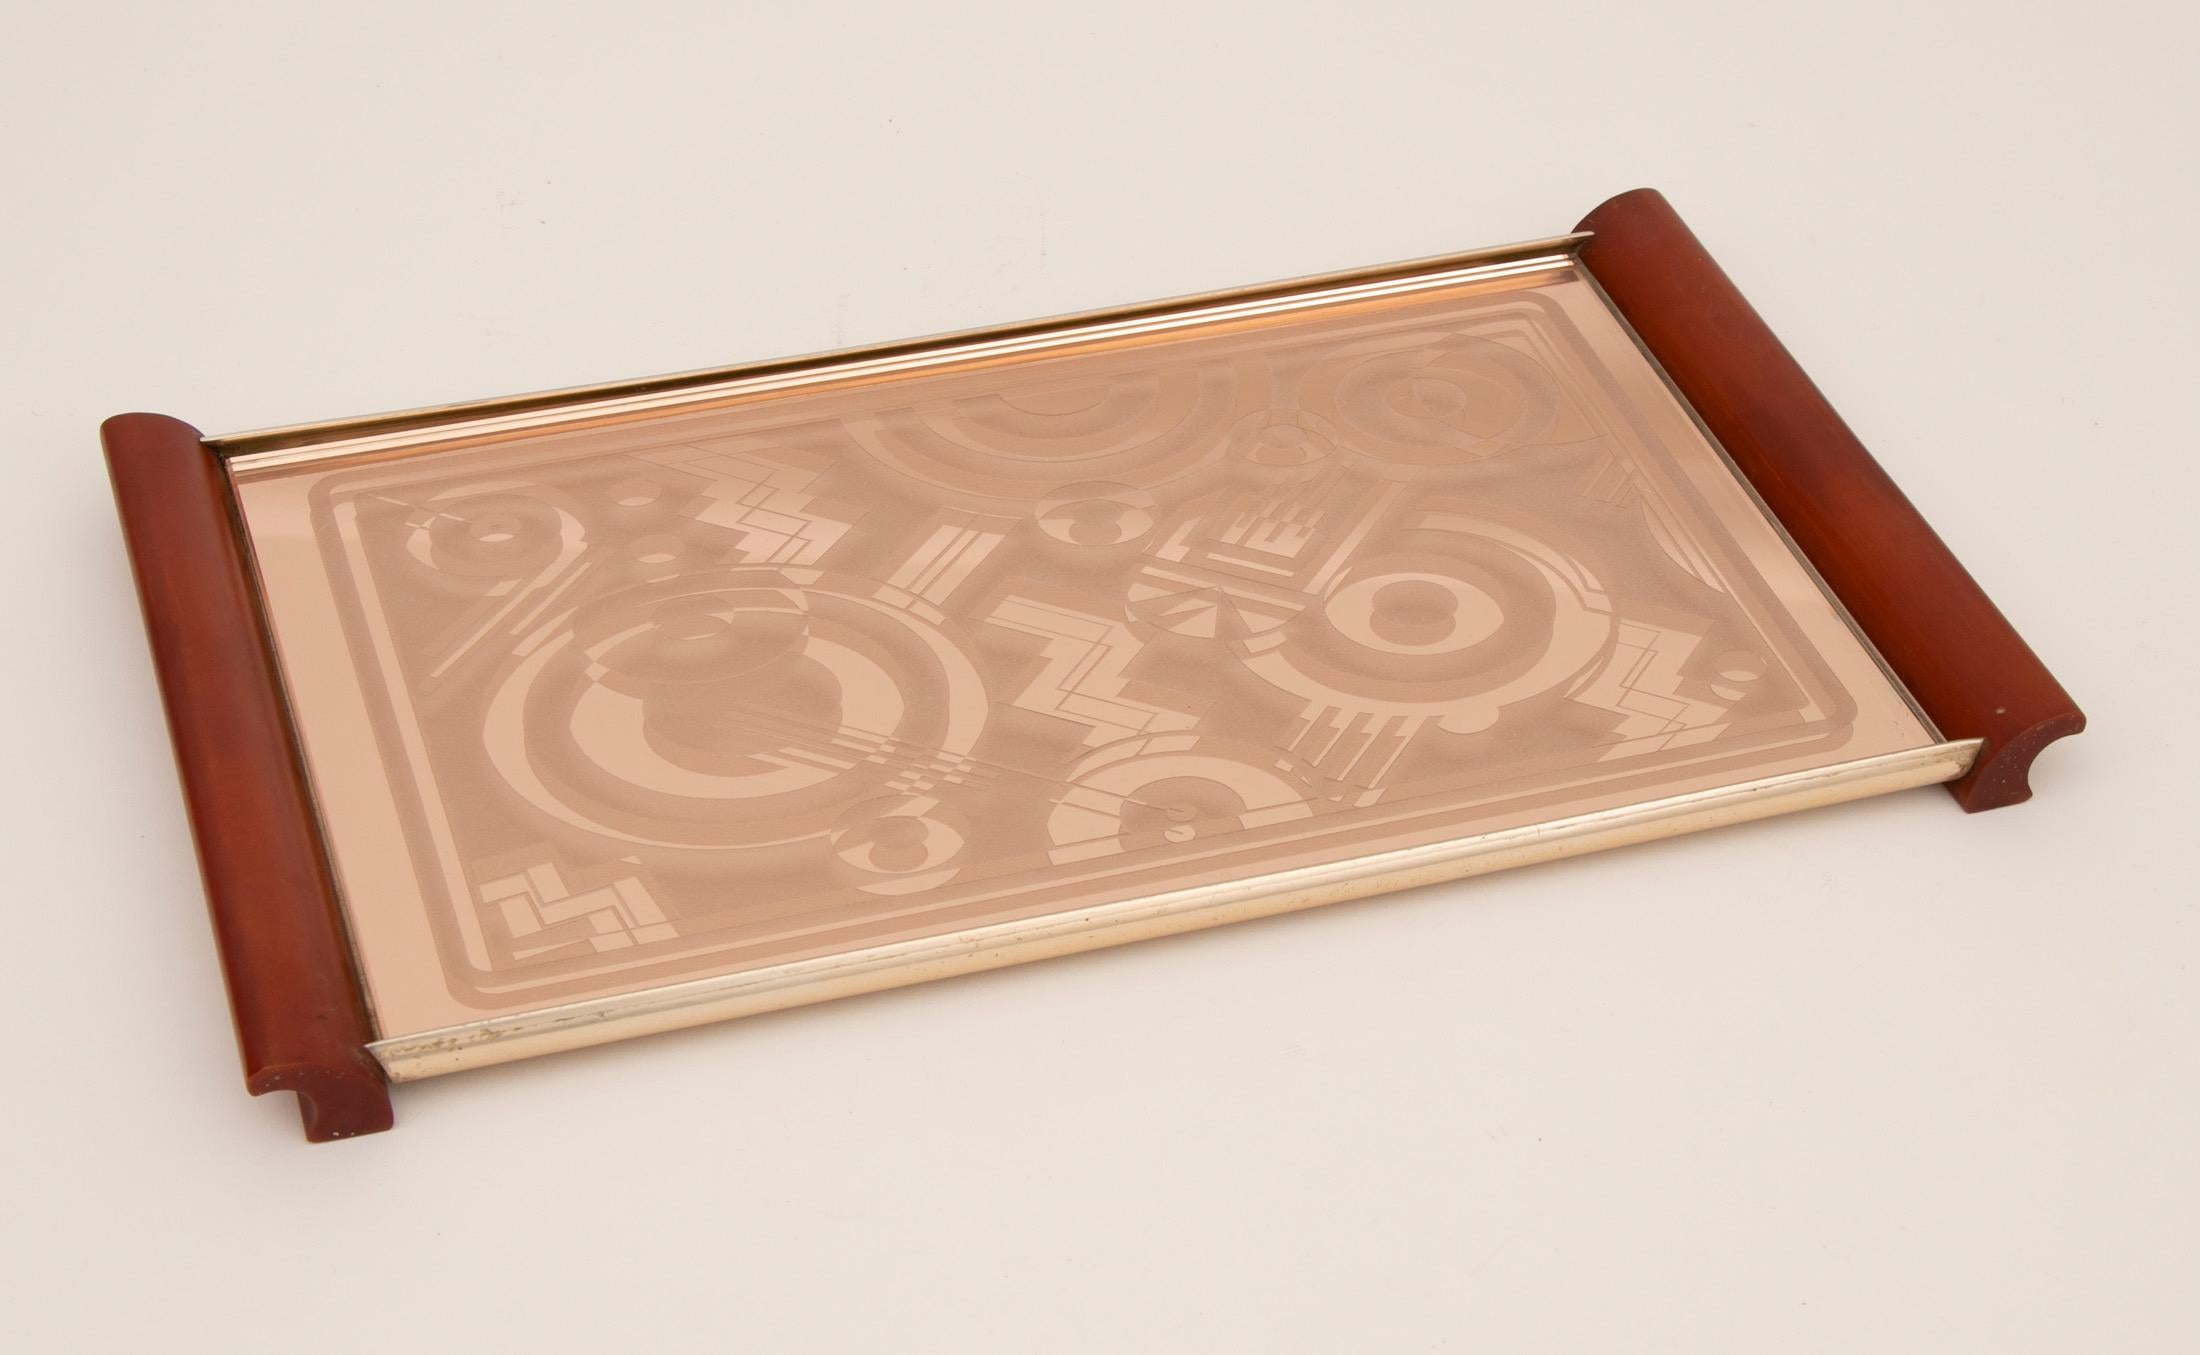 Art Deco Tray with Amber Phenolic Handles and Peach Mirror glass with a superb geometric design, by Kaymet 
H: 2.5cm W: 40cm D: 22cm
French C1930